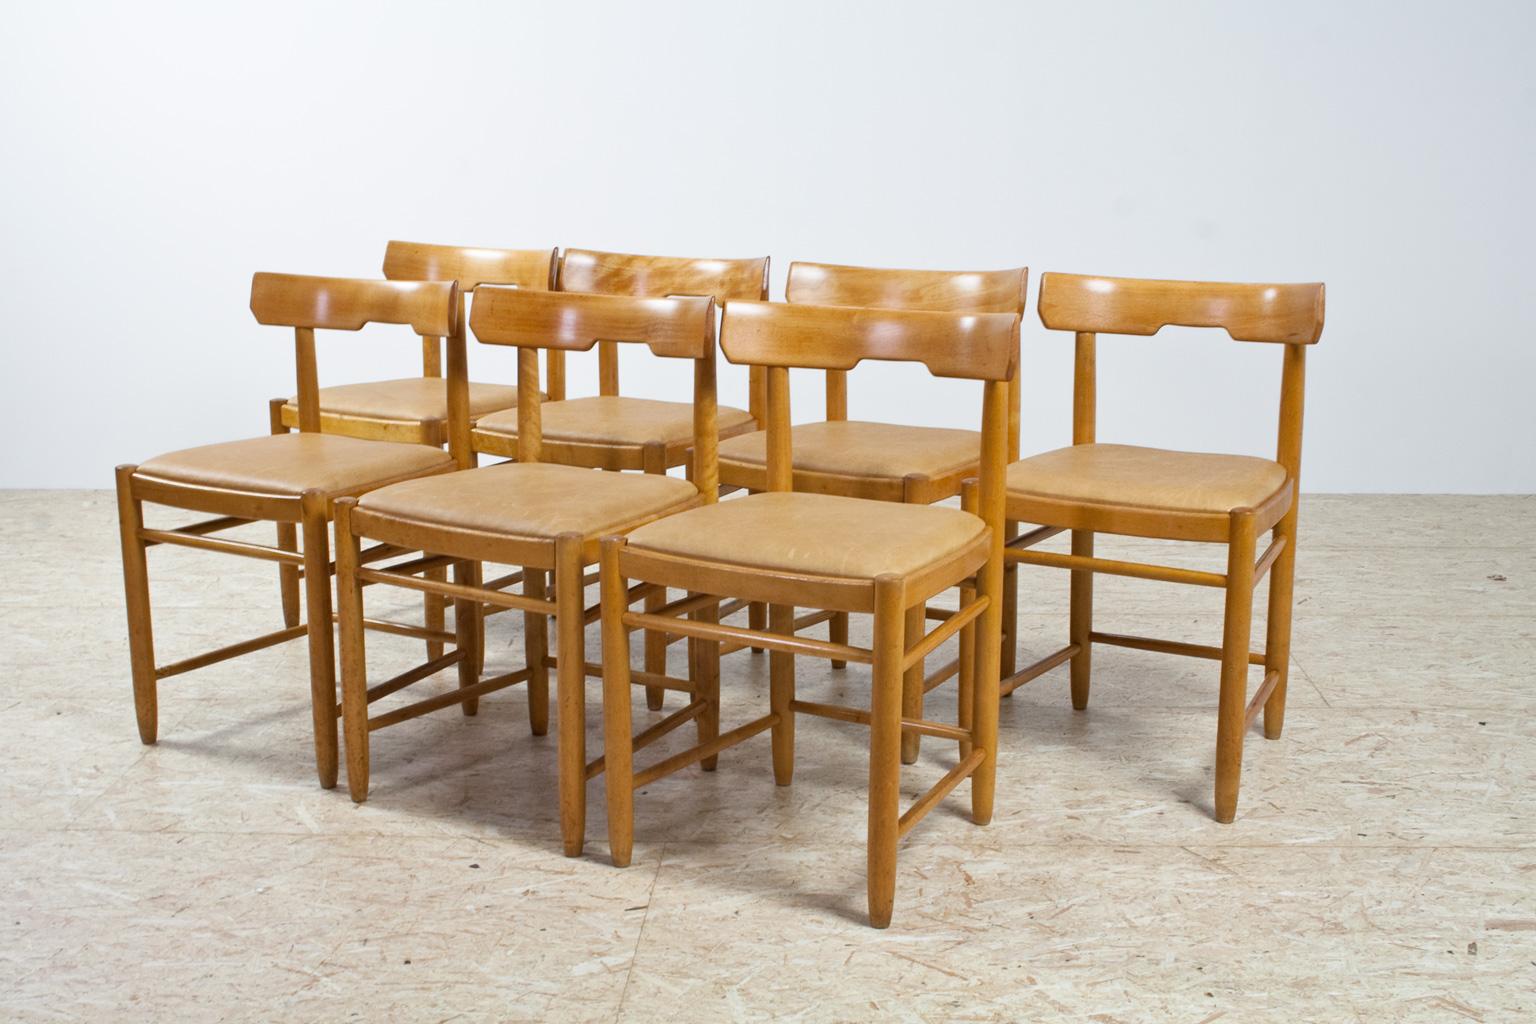 Scandinavian Modern re-upholstered set of 7 Beech dining chairs, Danish origin possibly Farstrup. Construction of the frames are checked, restored and oiled, pieces are re-upholstered with a camel/ tan colored natural leather. In great condition.